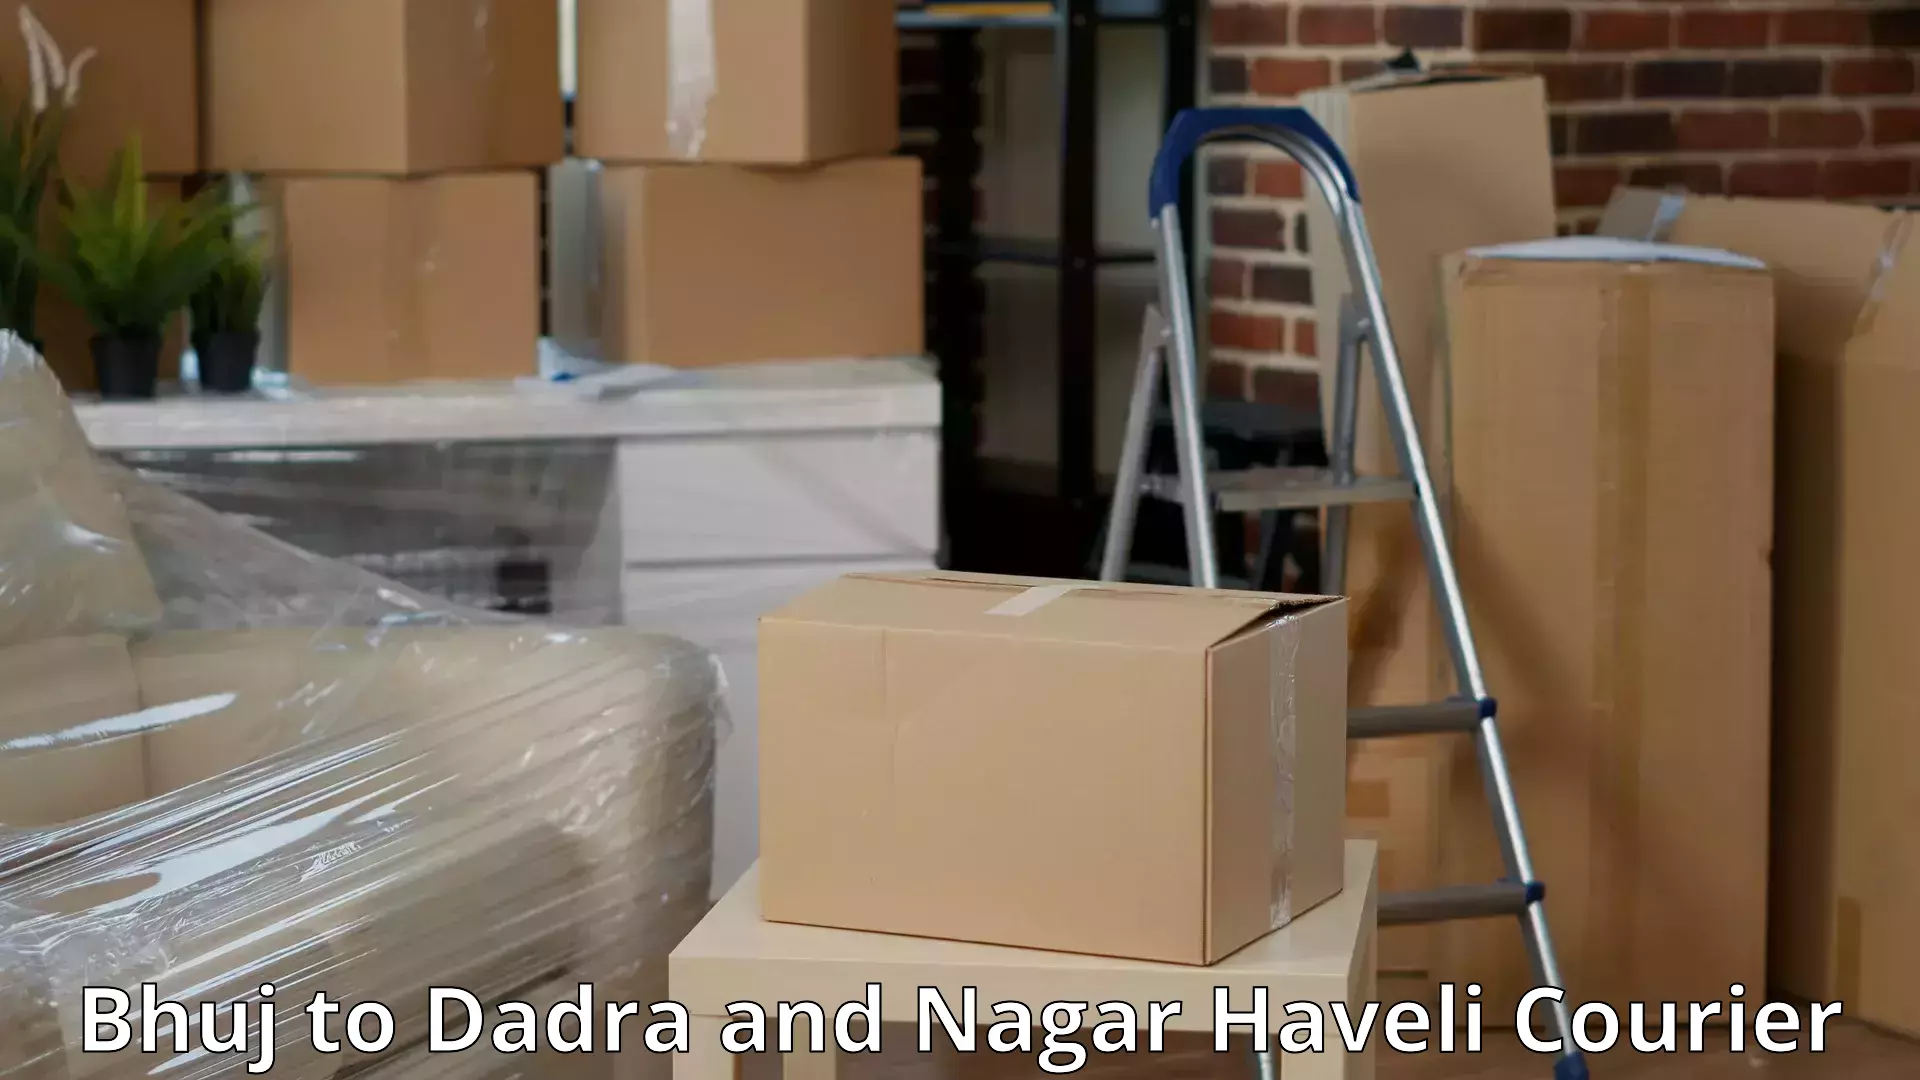 Trusted relocation experts Bhuj to Dadra and Nagar Haveli